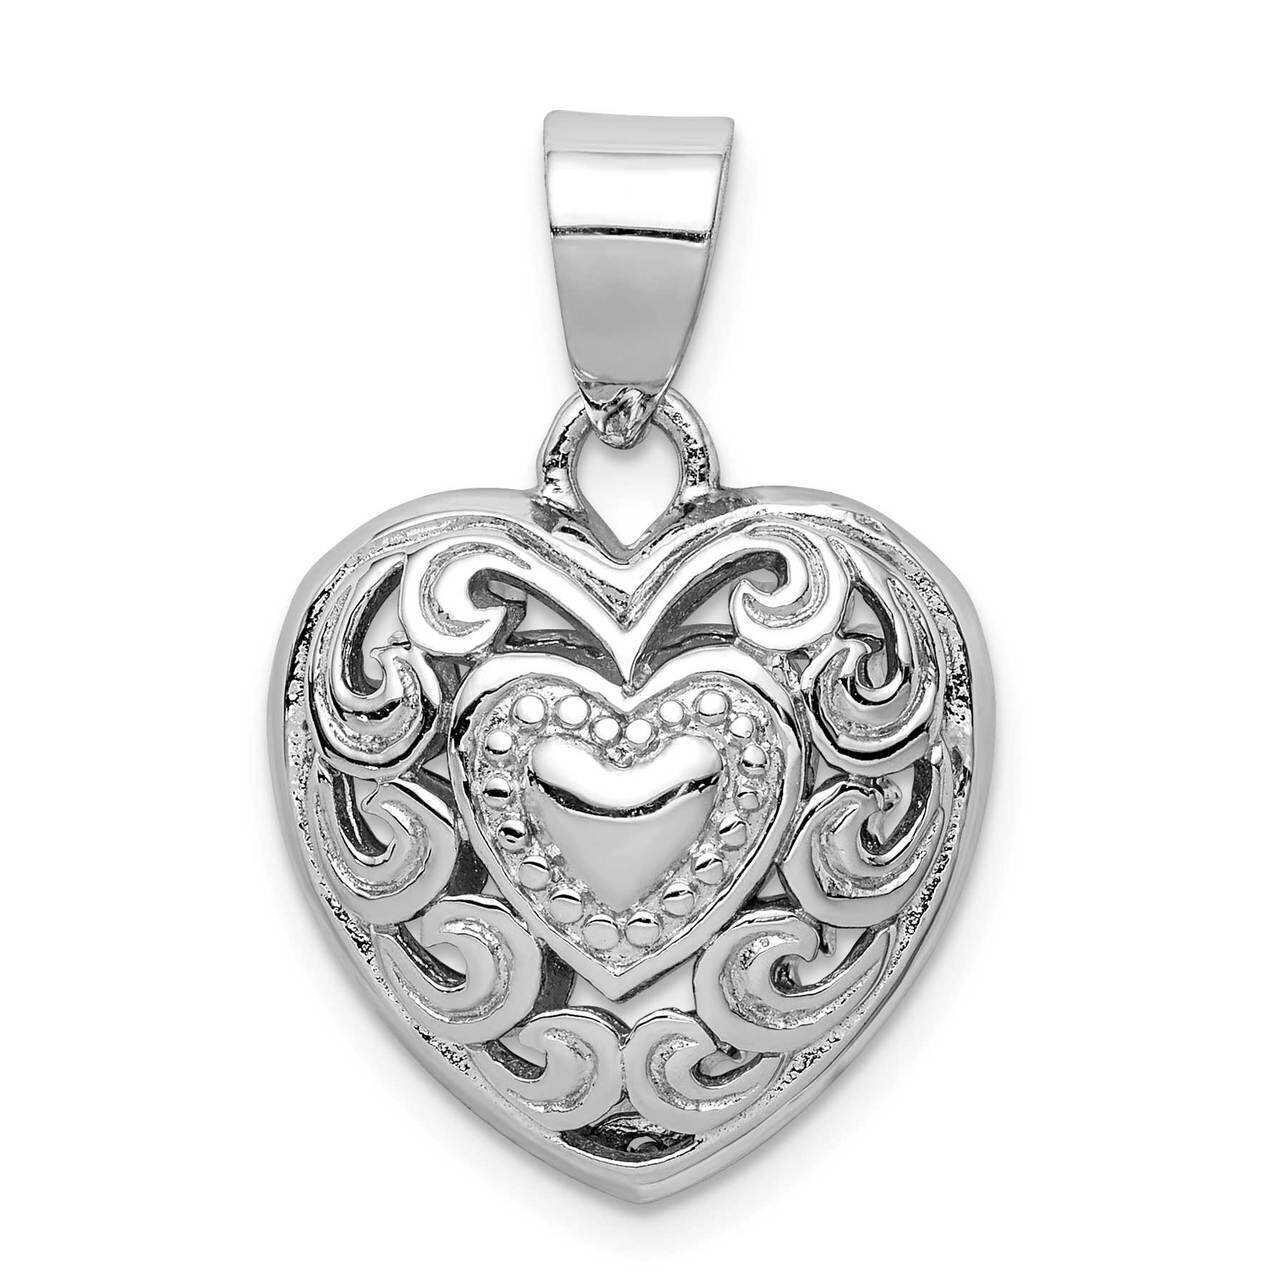 Cut-out Heart Swirl Pendant Sterling Silver Rhodium-plated QC9483